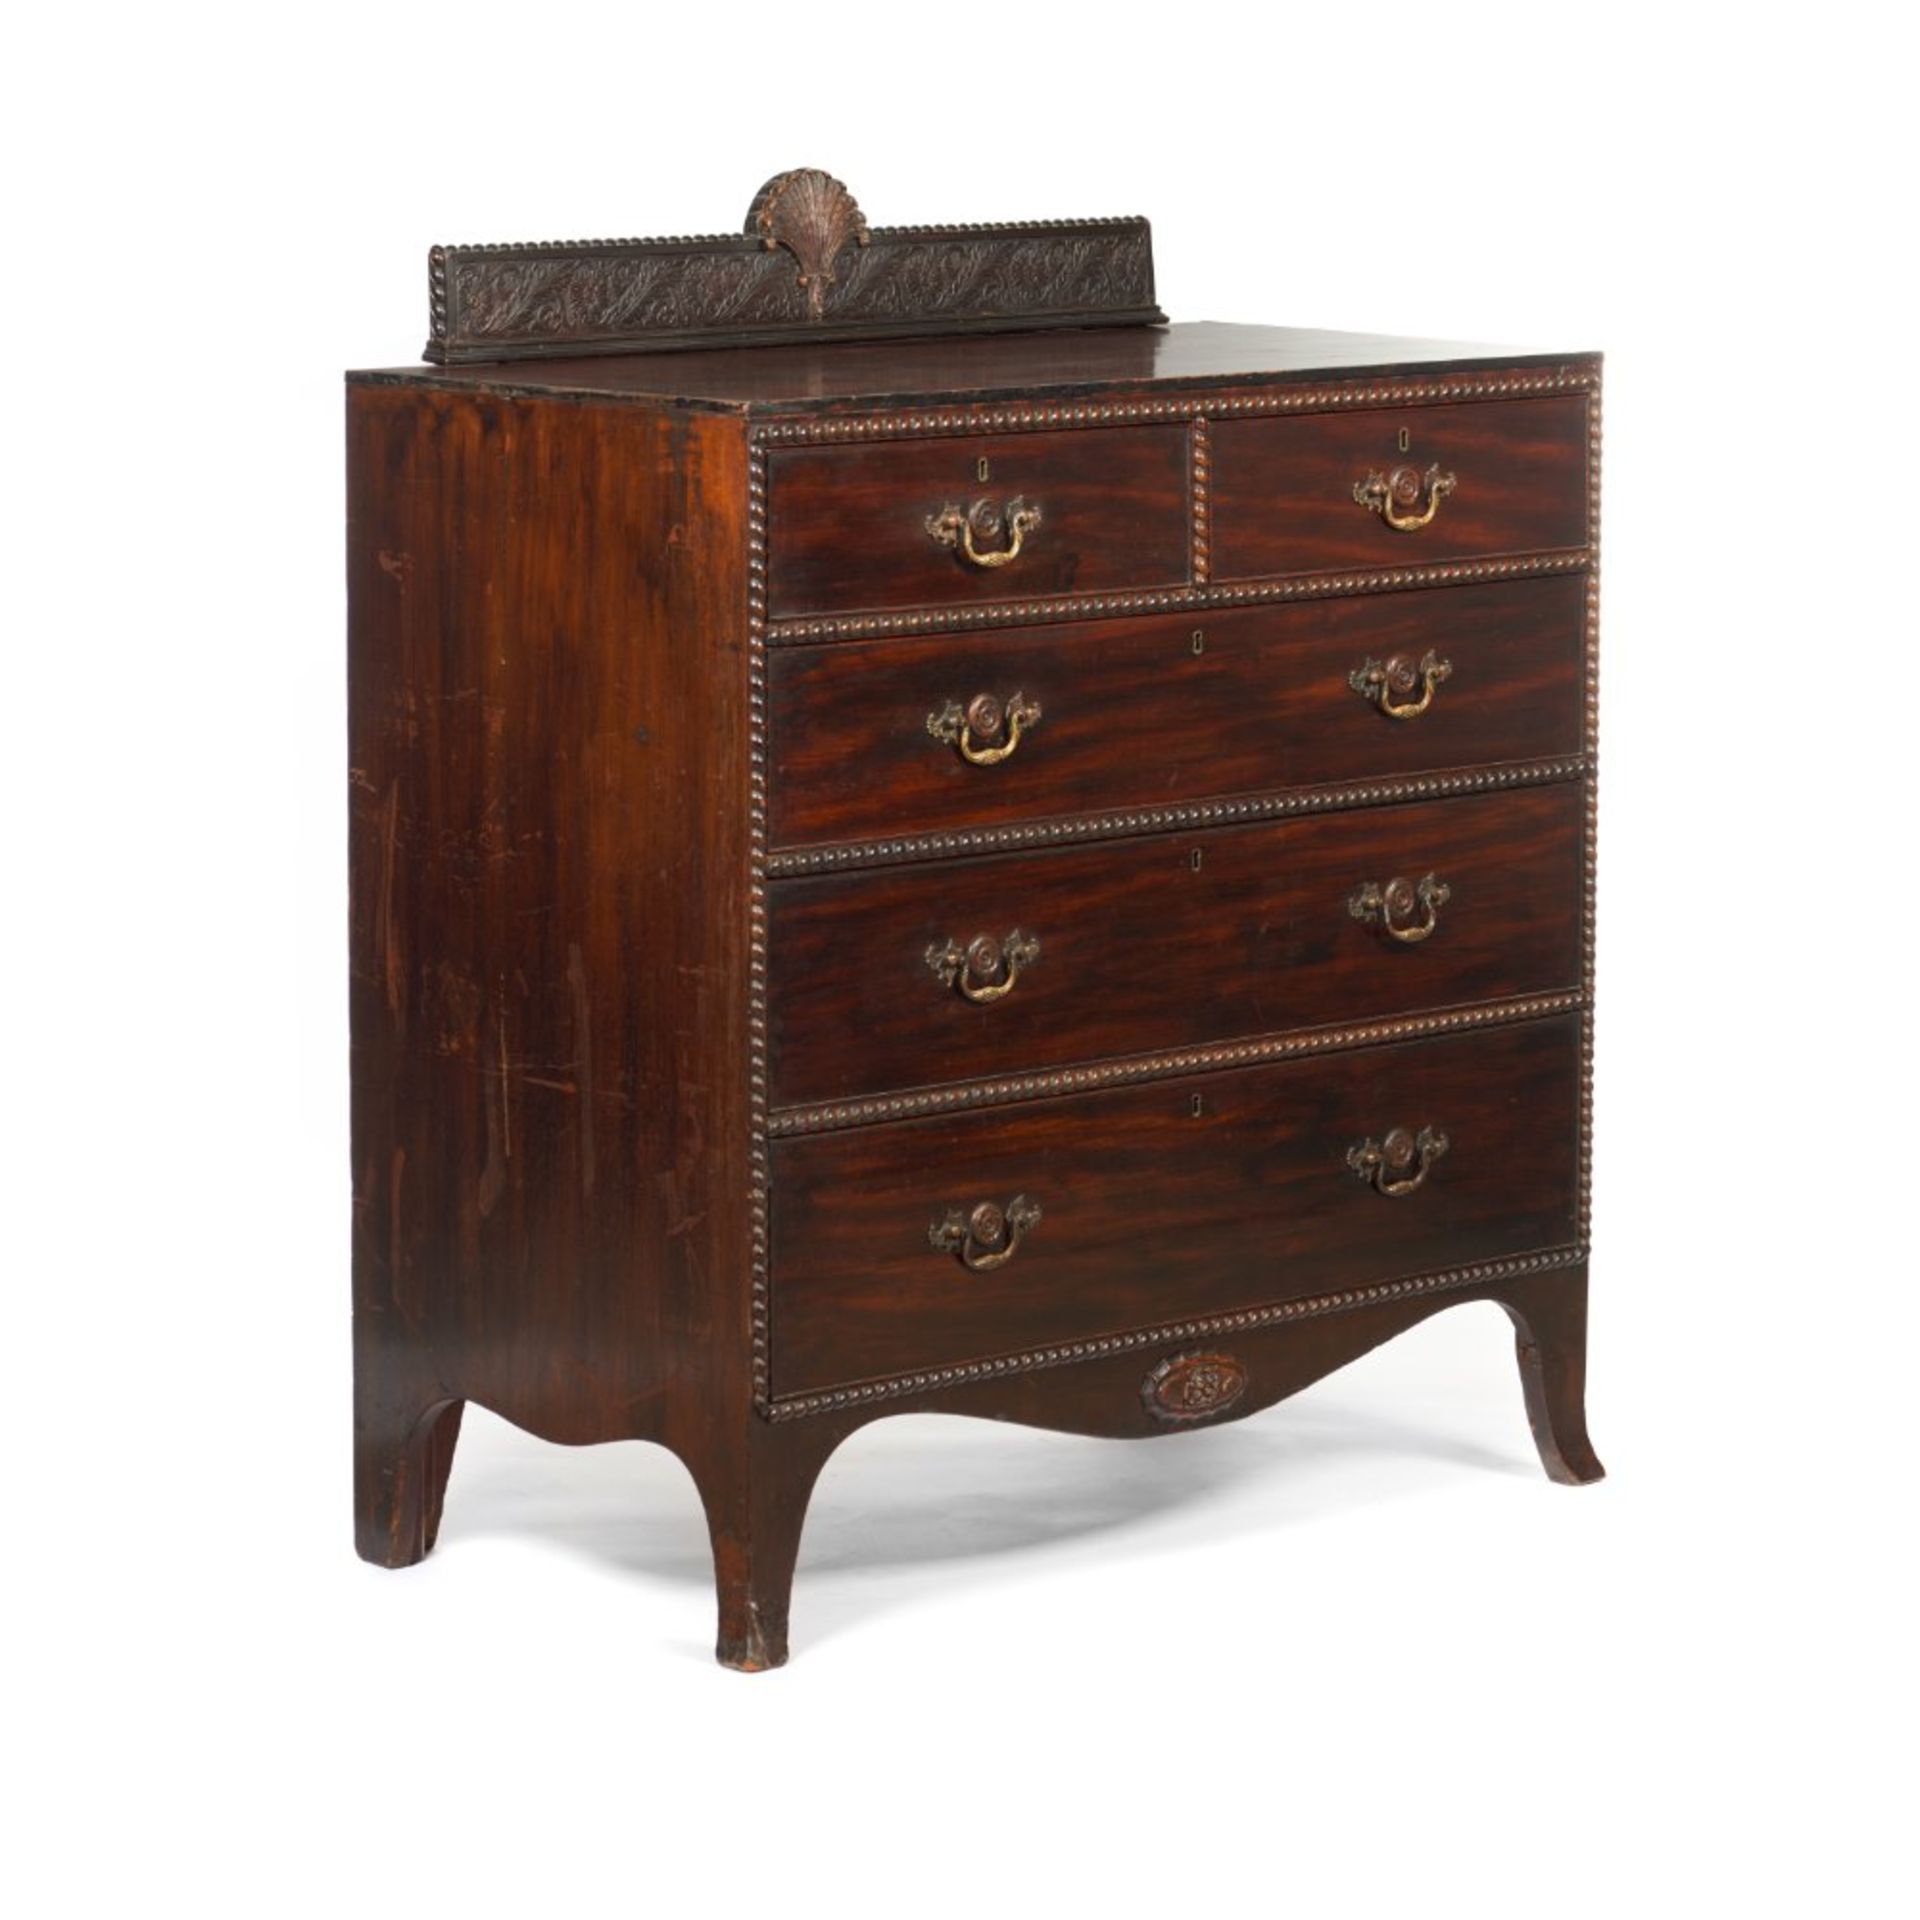 A George III style chest of drawers - Image 2 of 2